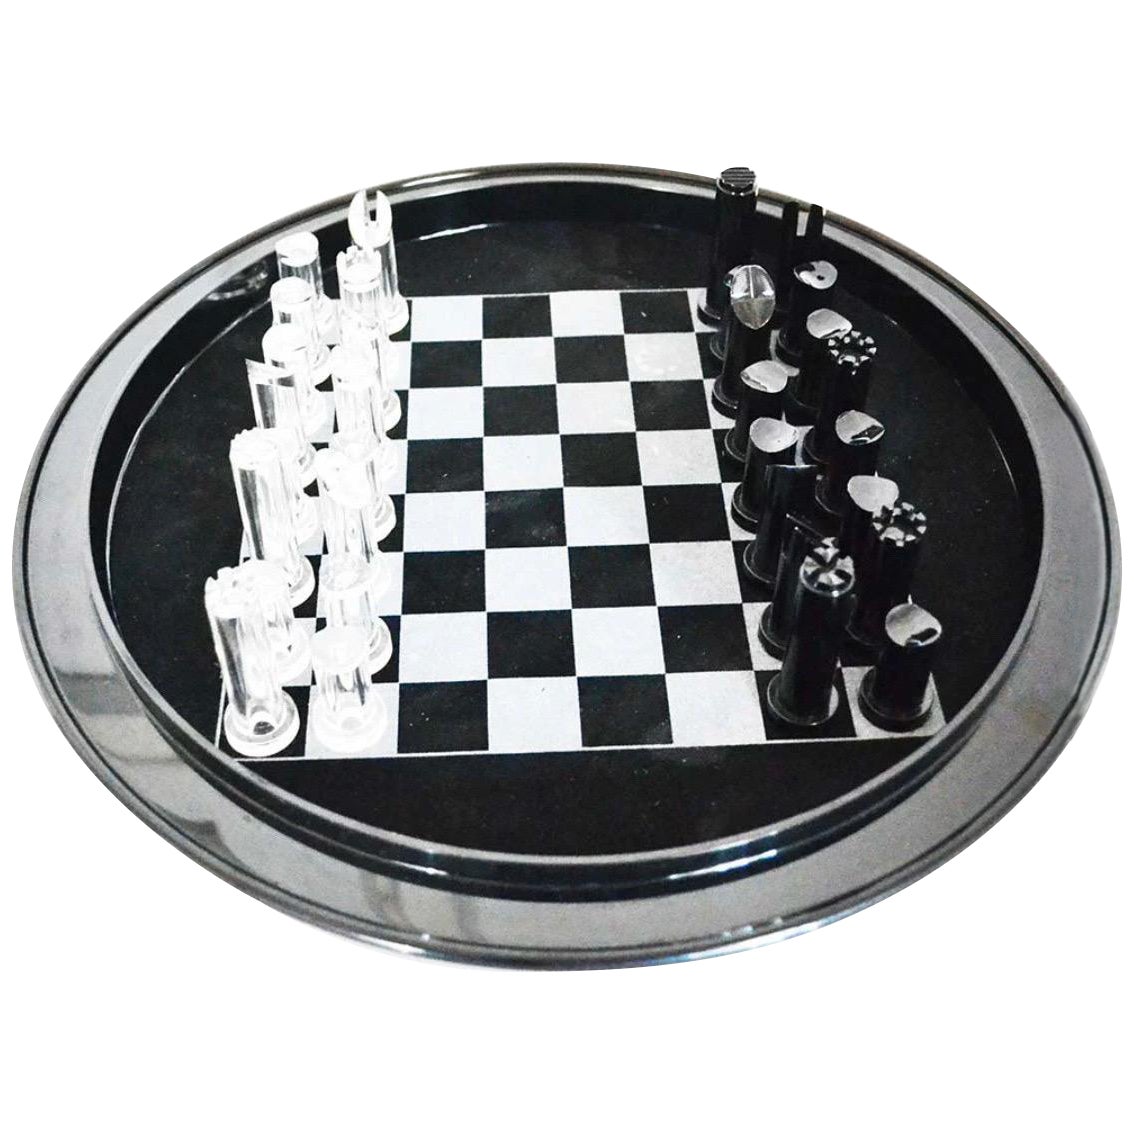 Game of Checkers produced by Rede Guzzini for Krizia, Design